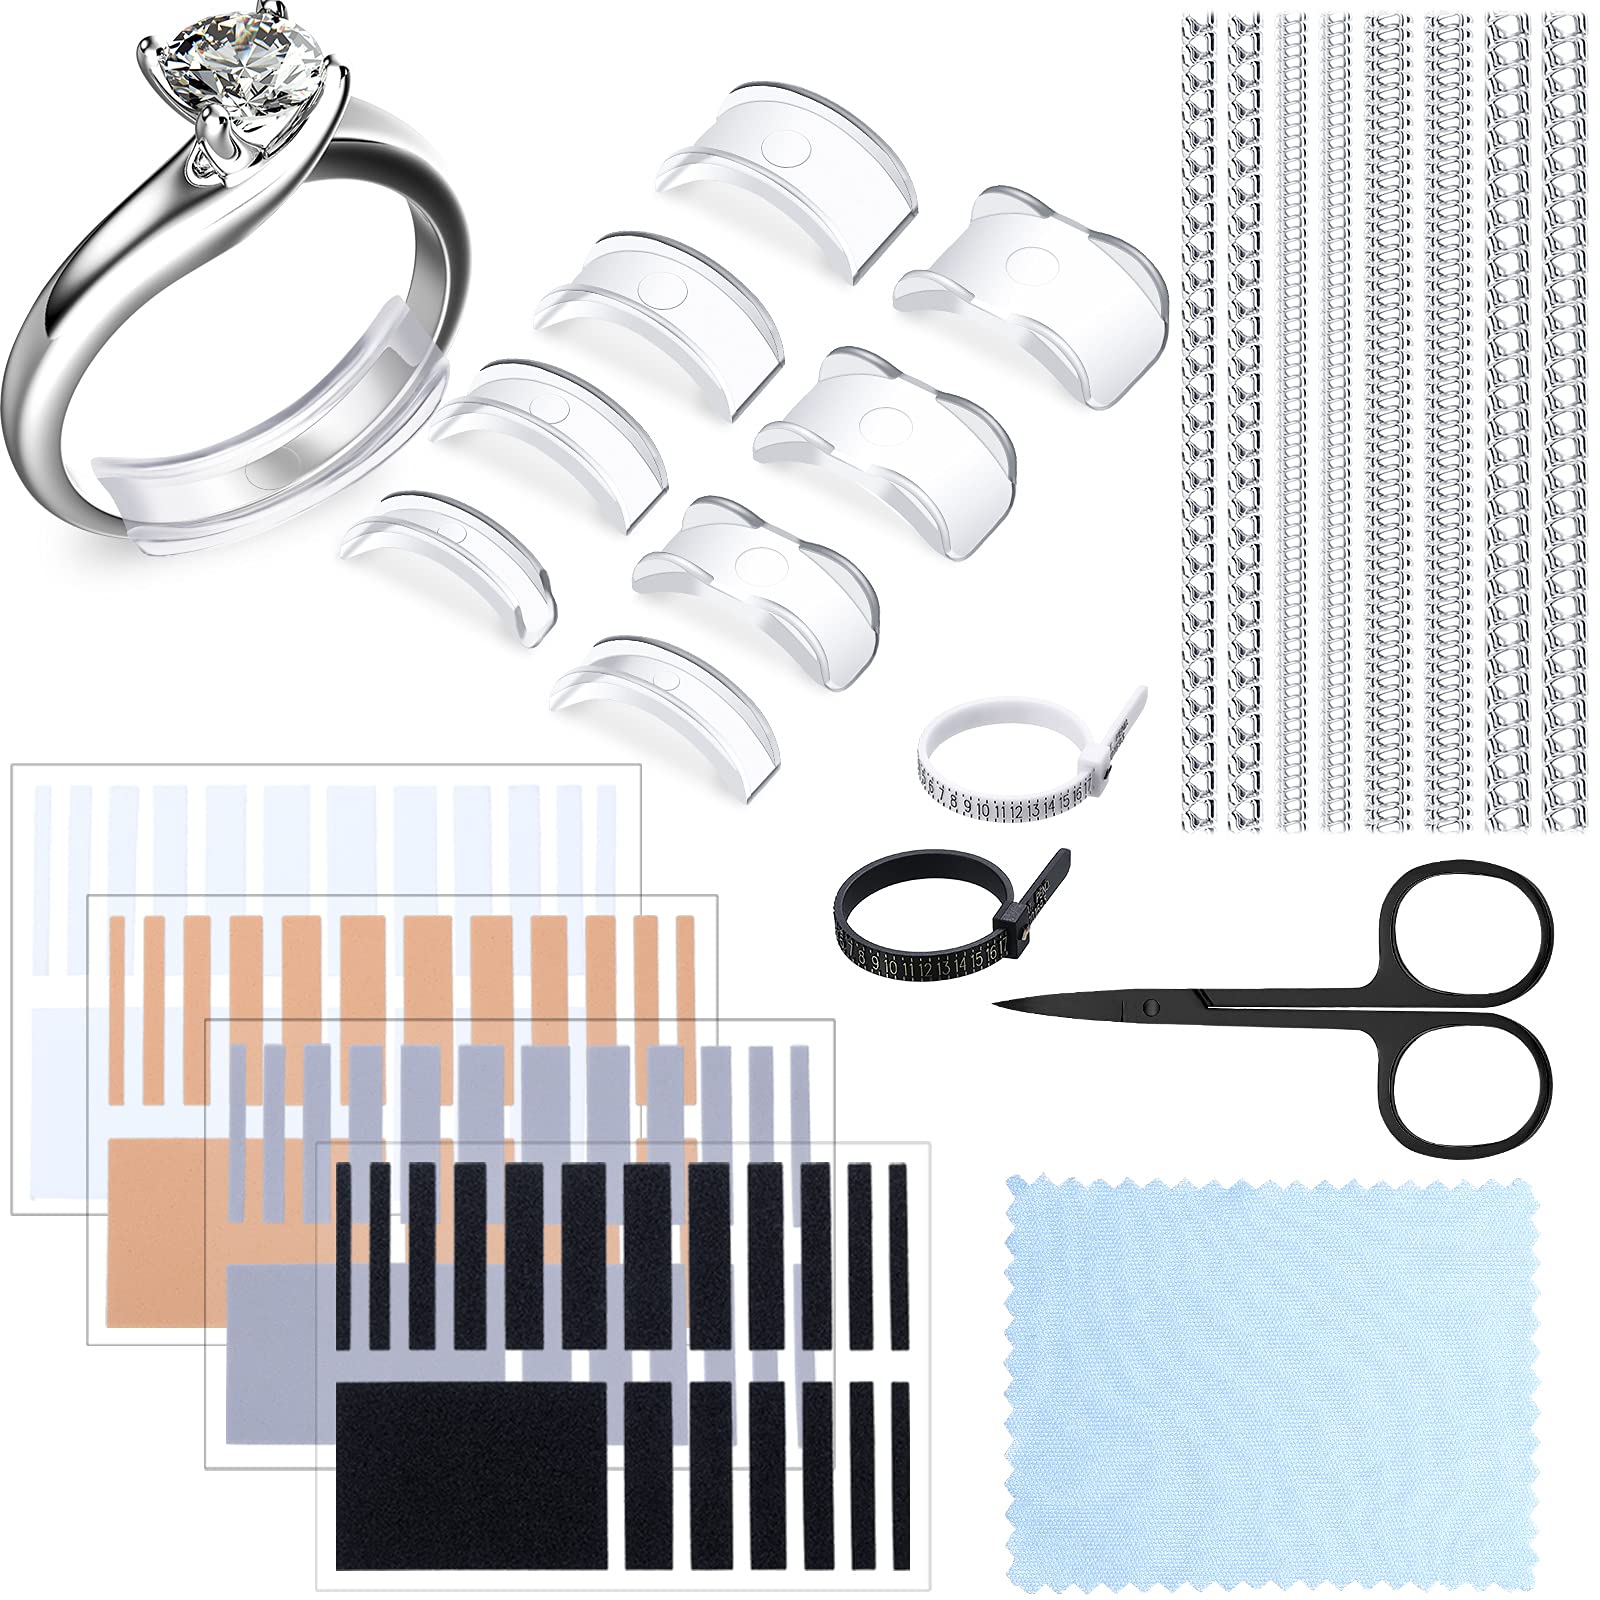 Hicarer Invisible Ring Sizer Adjuster Ring Spacer Ring Guards Ring